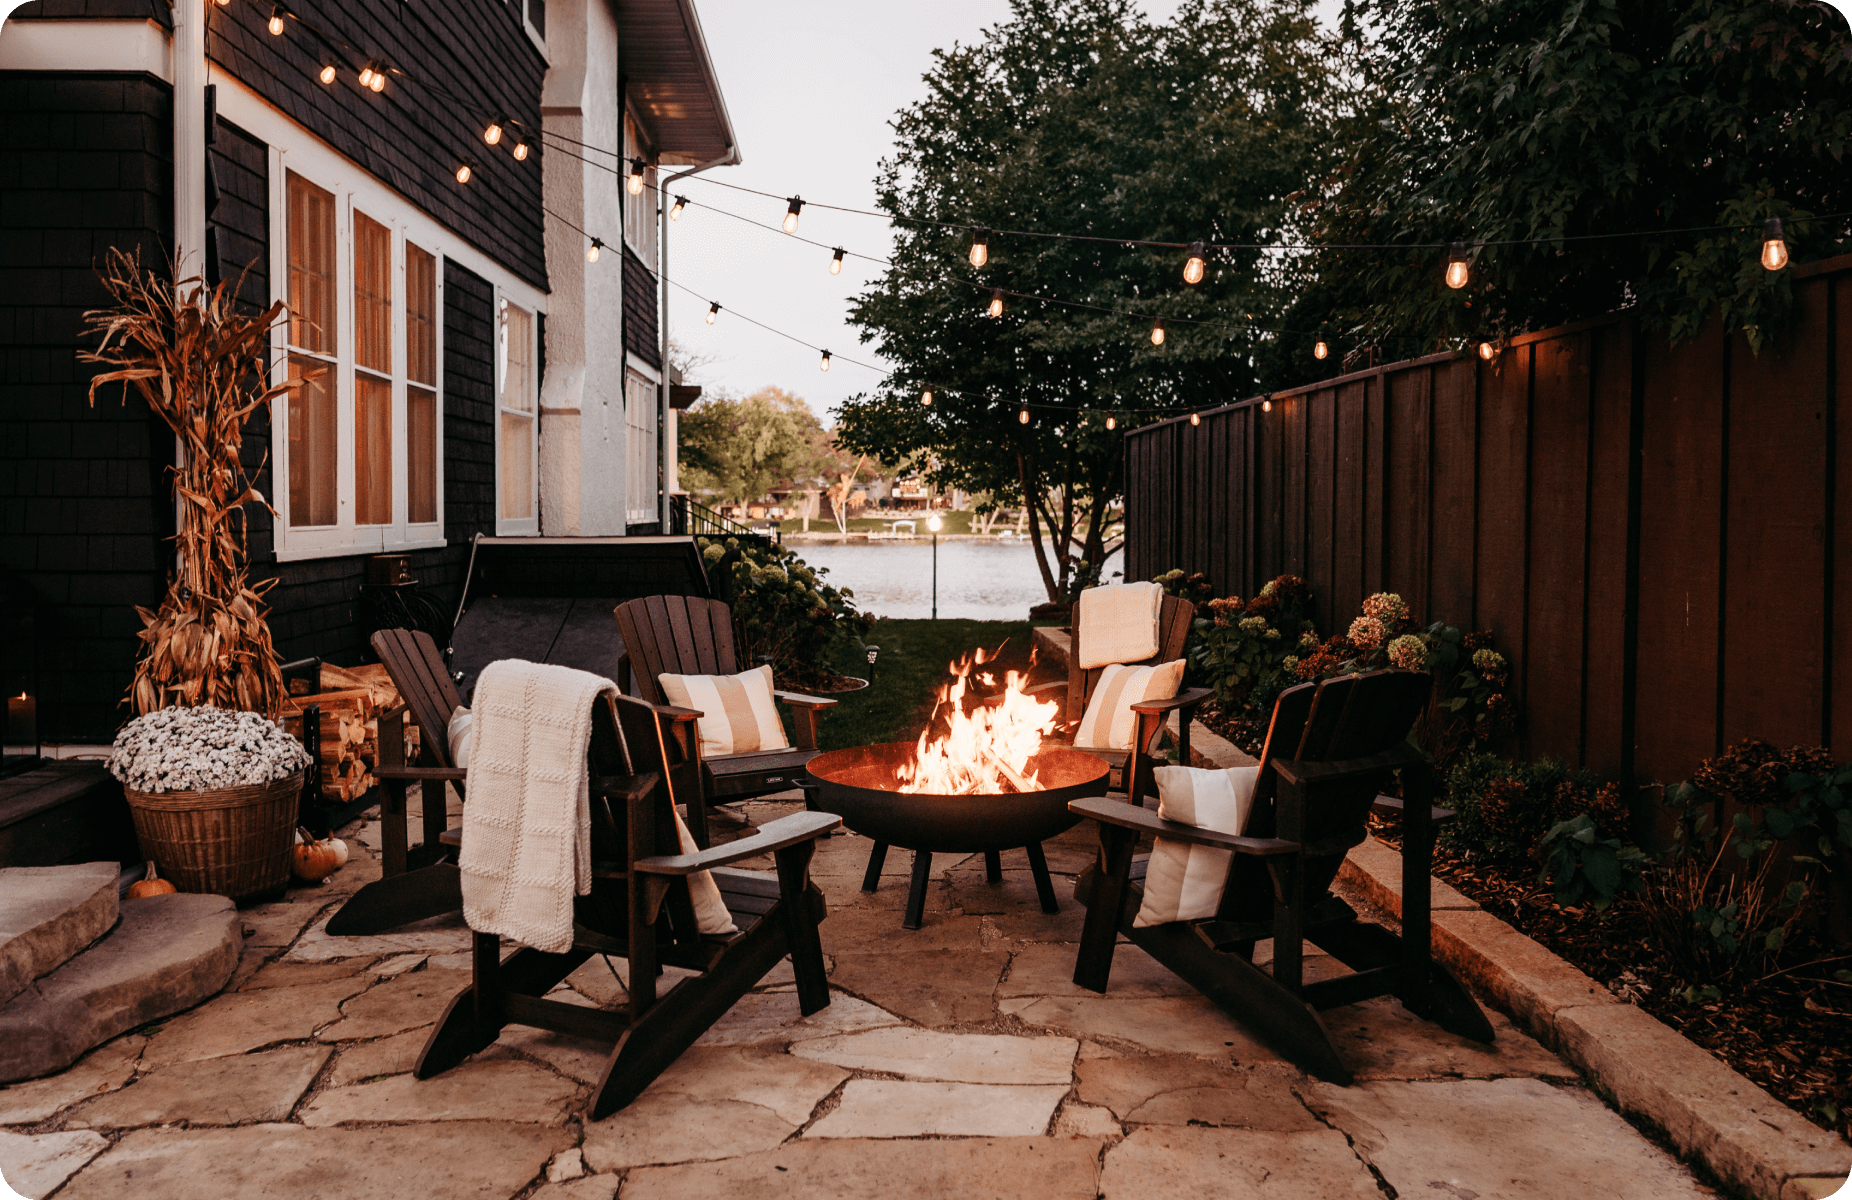 Firepit to the side of a house with a lake in the background